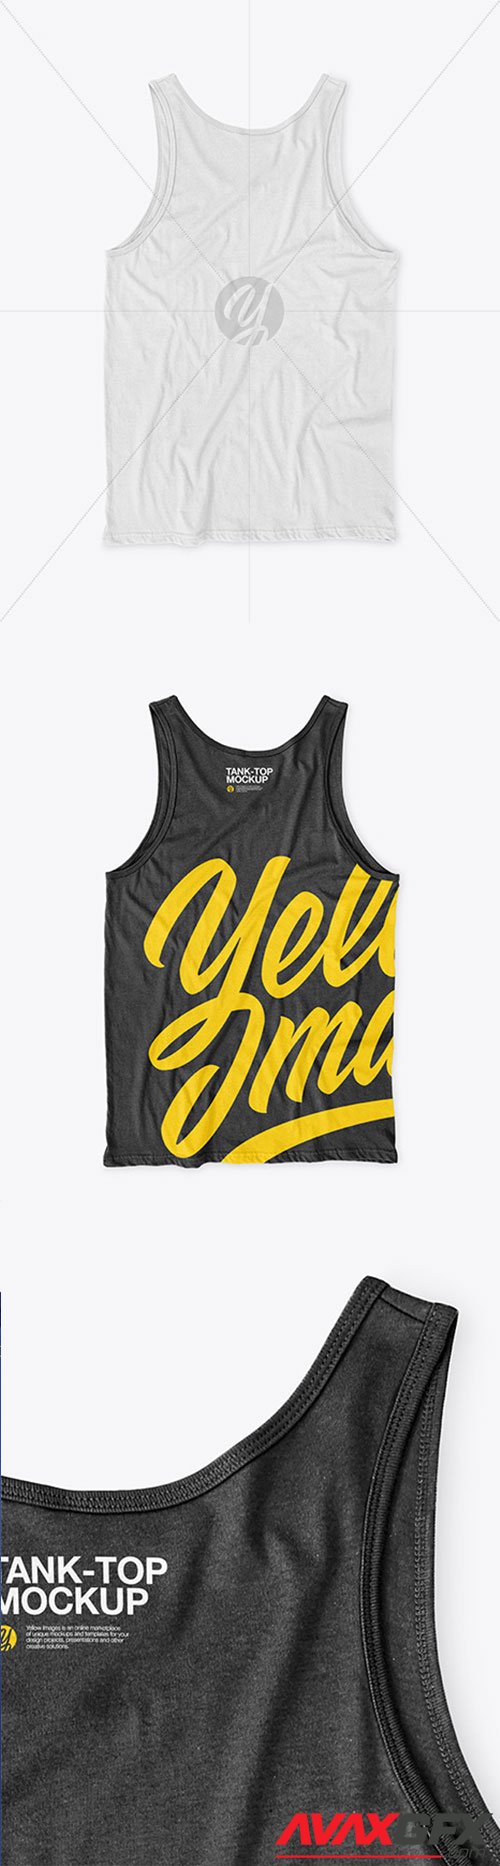 Tank Top with Round Neck Mockup 60920